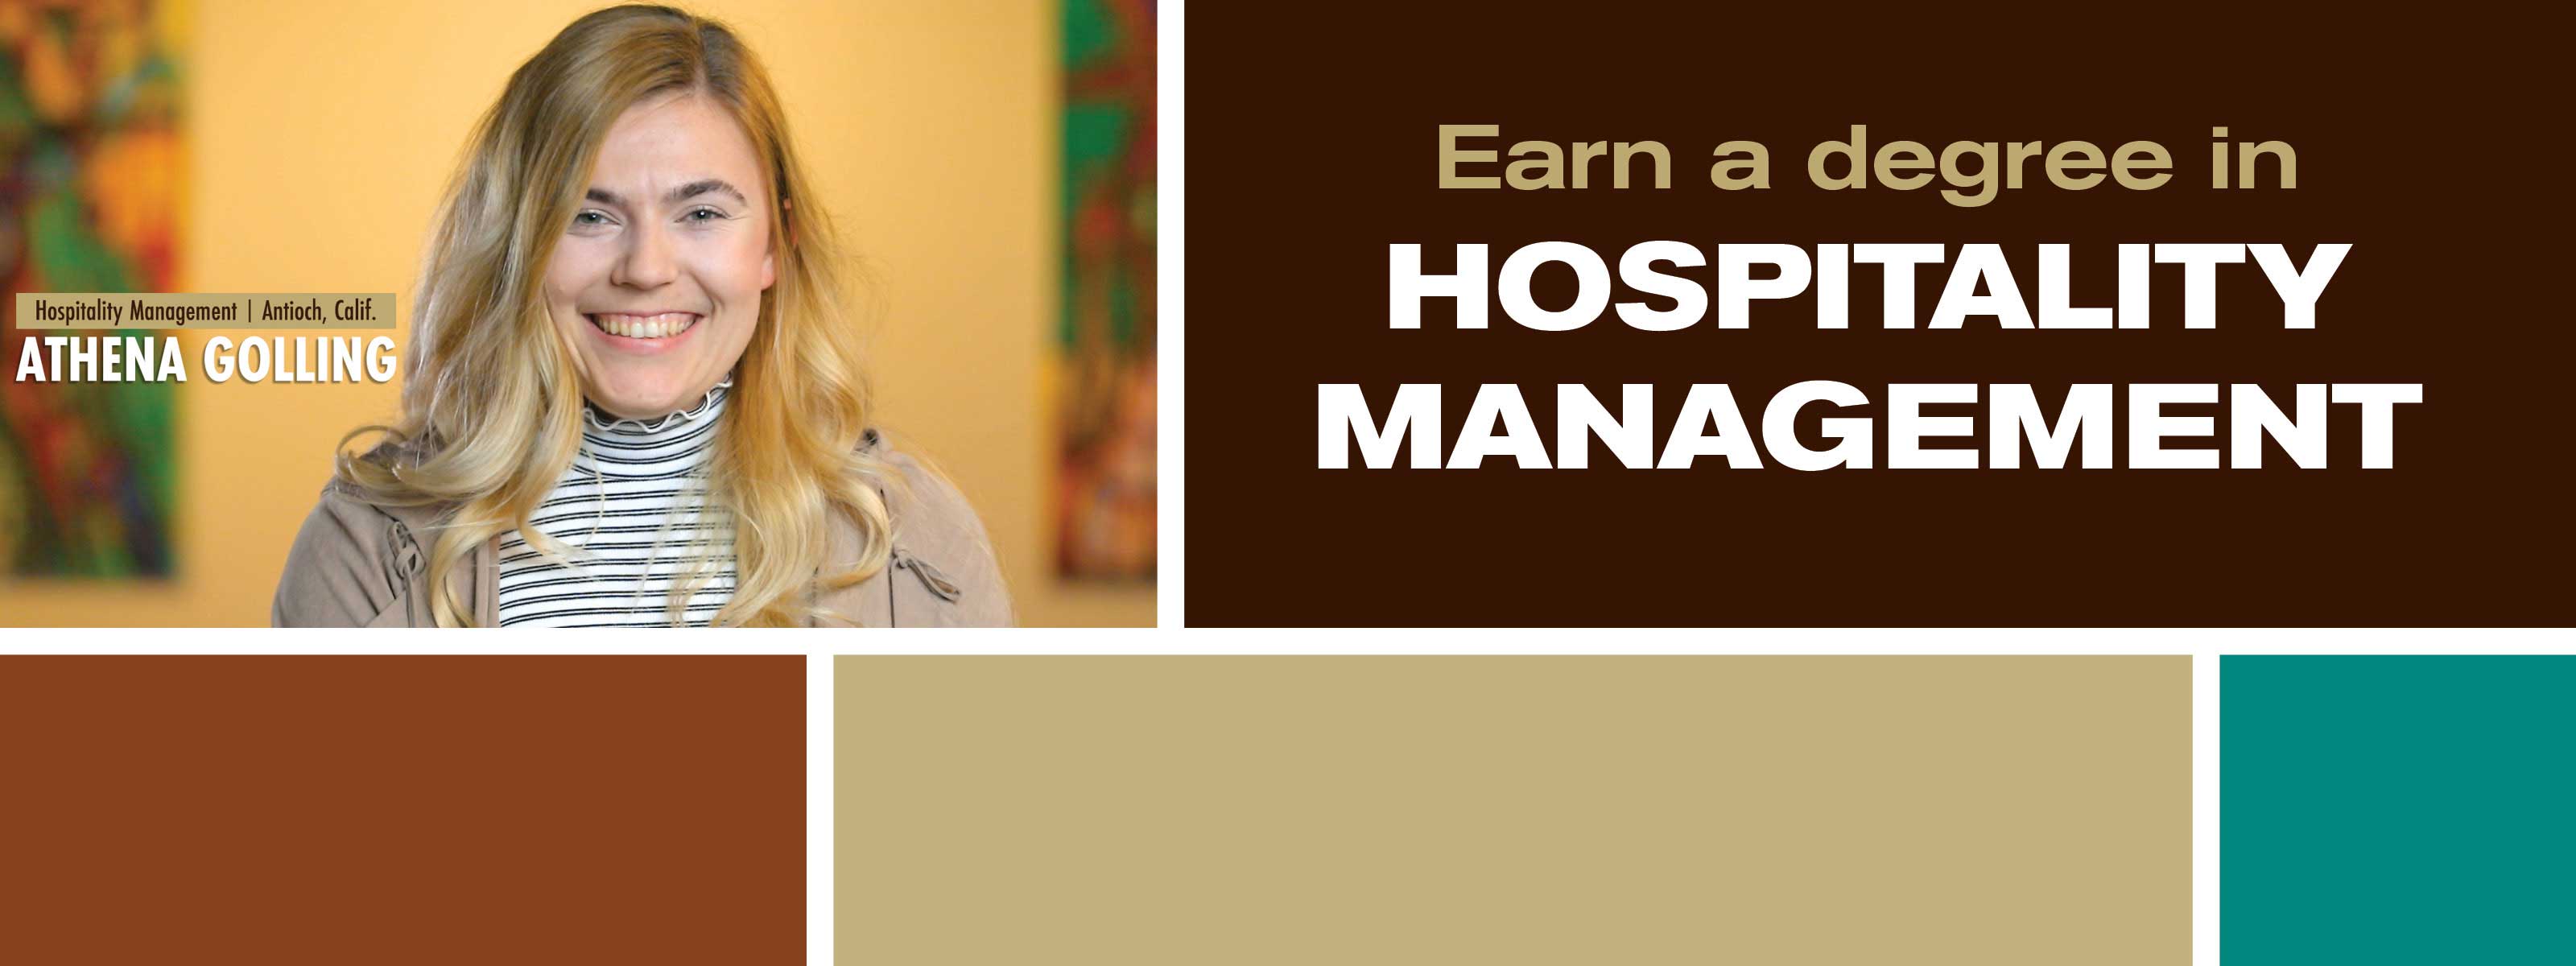 Earn A Degree In Hospitality Management - Discover. Engage. Lead.